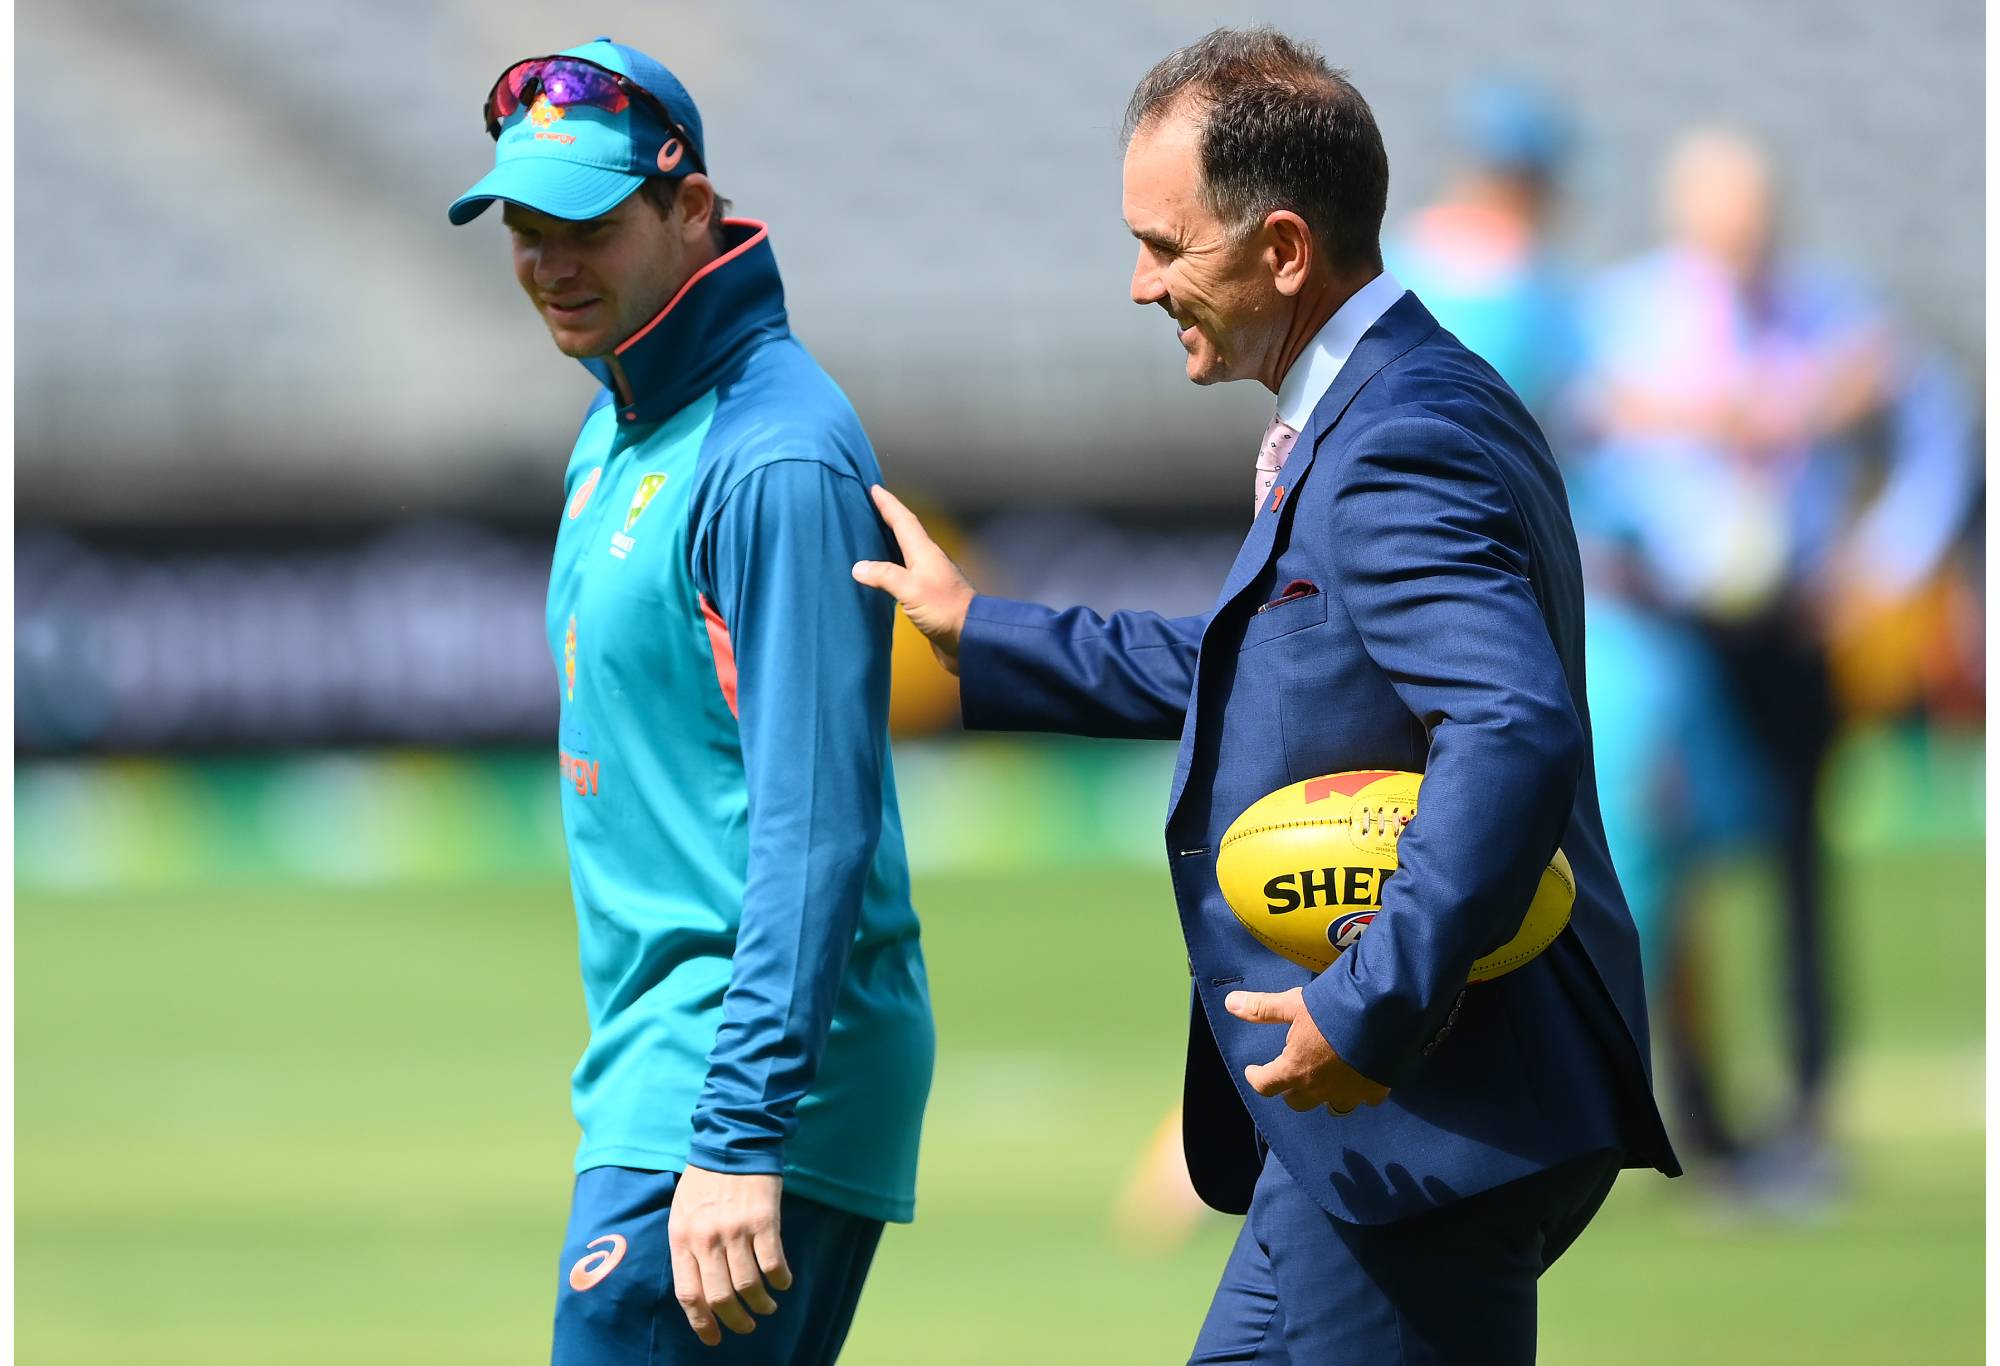 PERTH, AUSTRALIA - NOVEMBER 30: Justin Langer speaks with Steve Smith of Australia during day one of the First Test match between Australia and the West Indies at Optus Stadium on November 30, 2022 in Perth, Australia. (Photo by Quinn Rooney - CA/Cricket Australia via Getty Images)